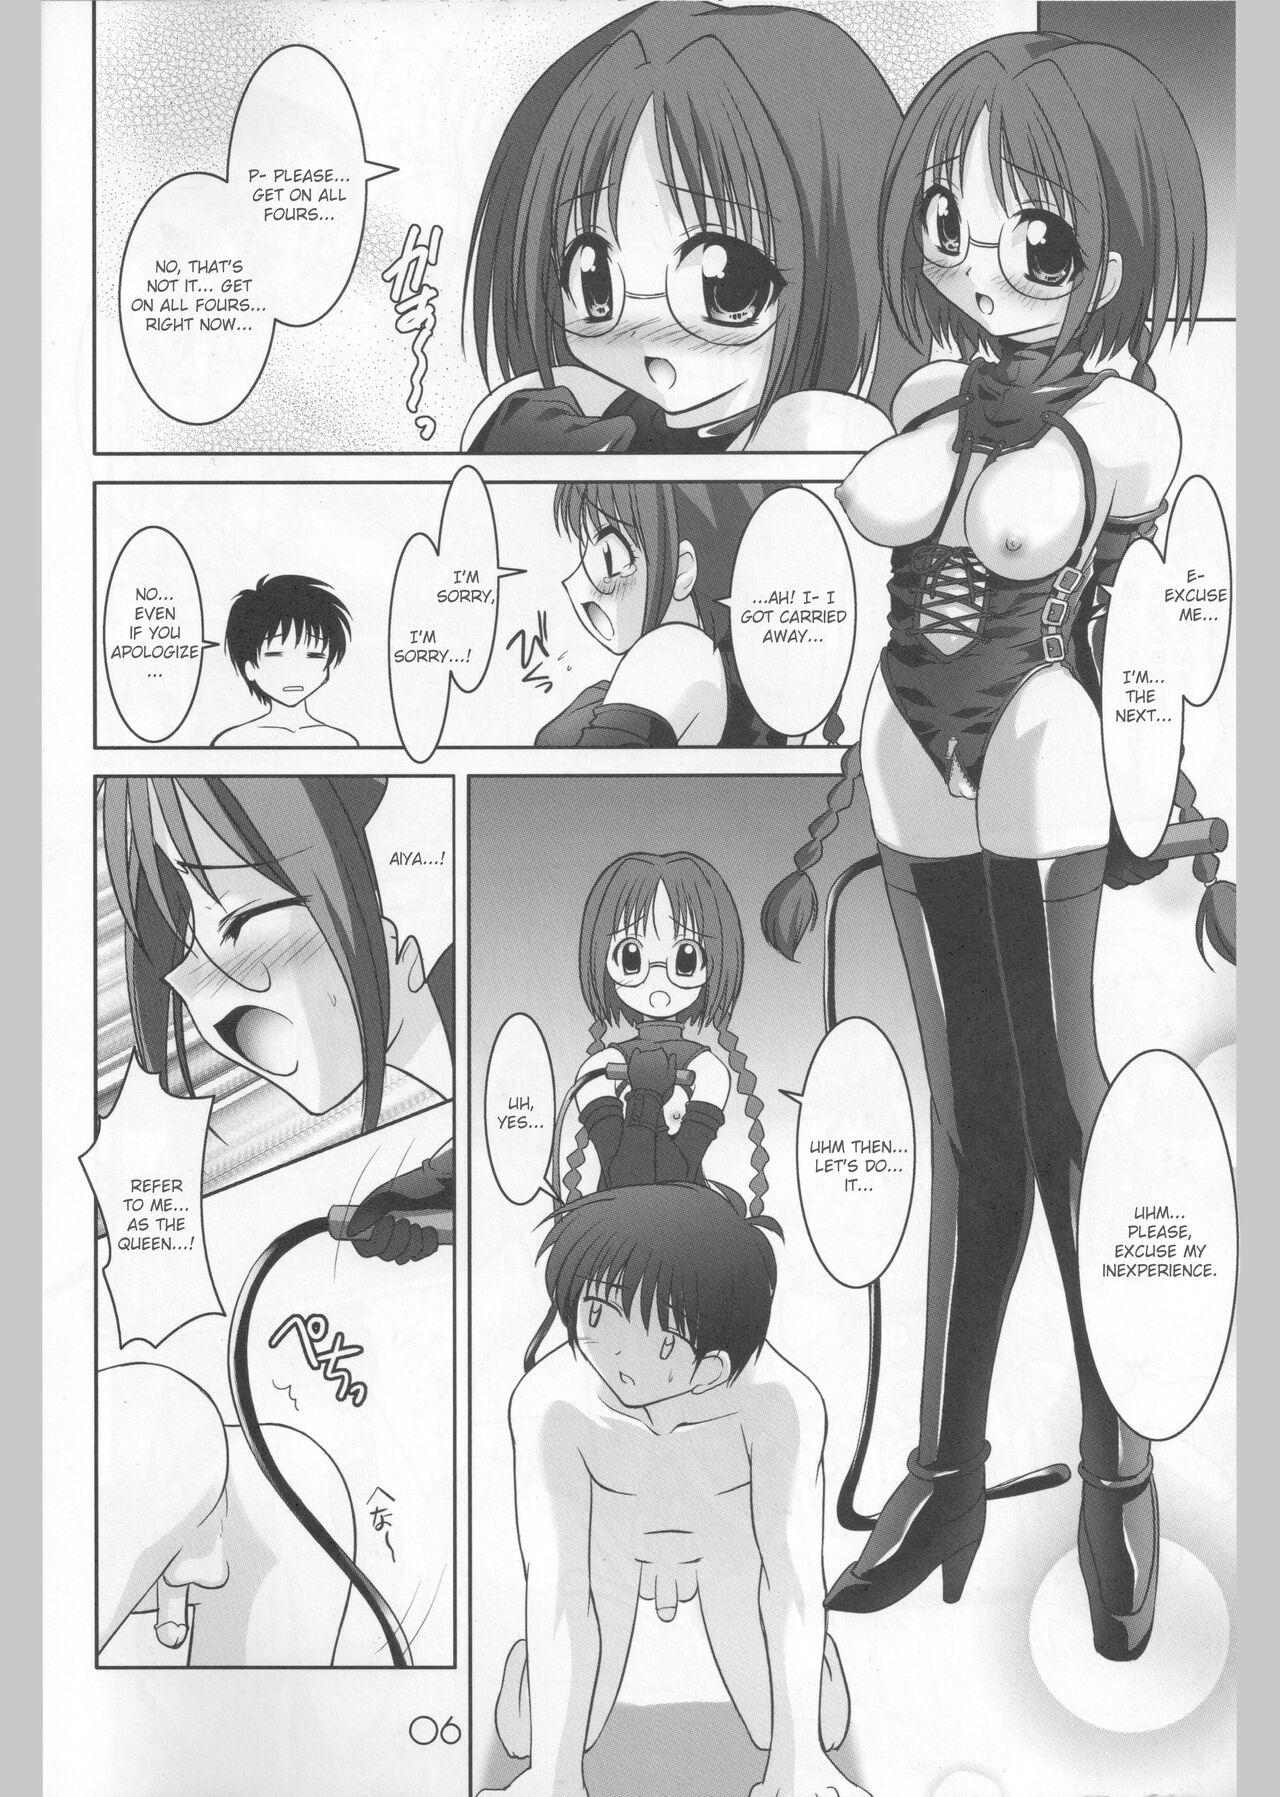 Neighbor Ring My Bell - MAGICALDELTA.COM - Tokyo mew mew | mew mew power Secret - Page 7